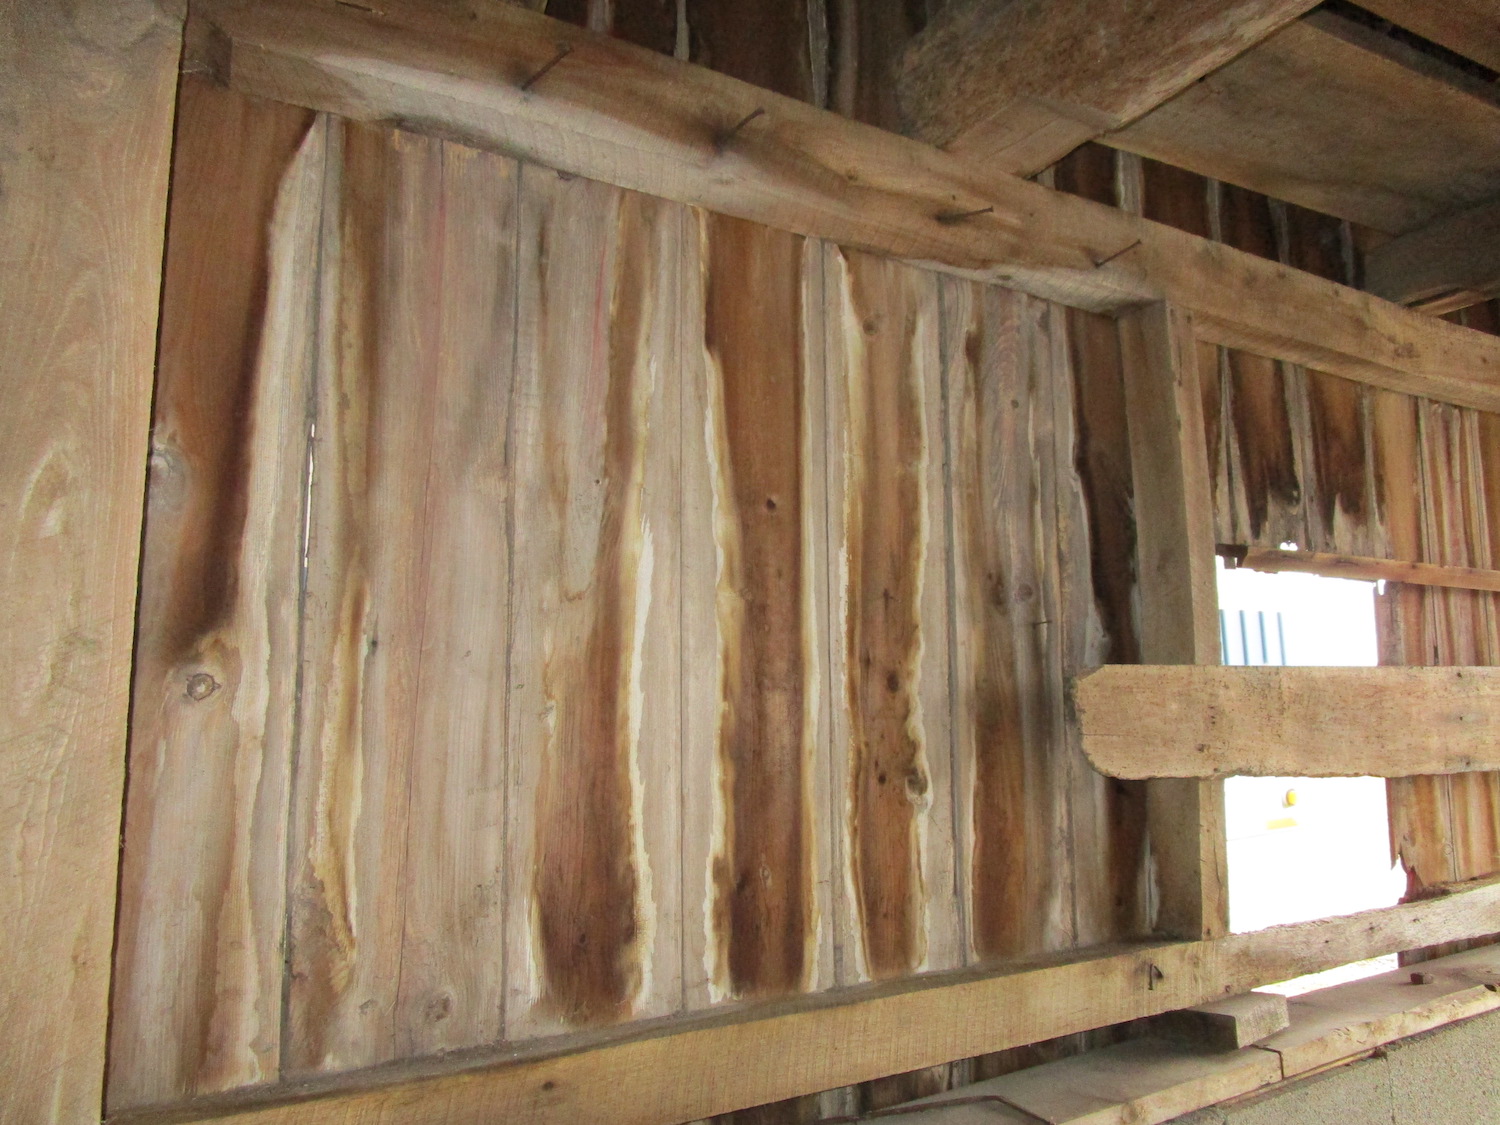 A picture of the inside of a barn's lower level